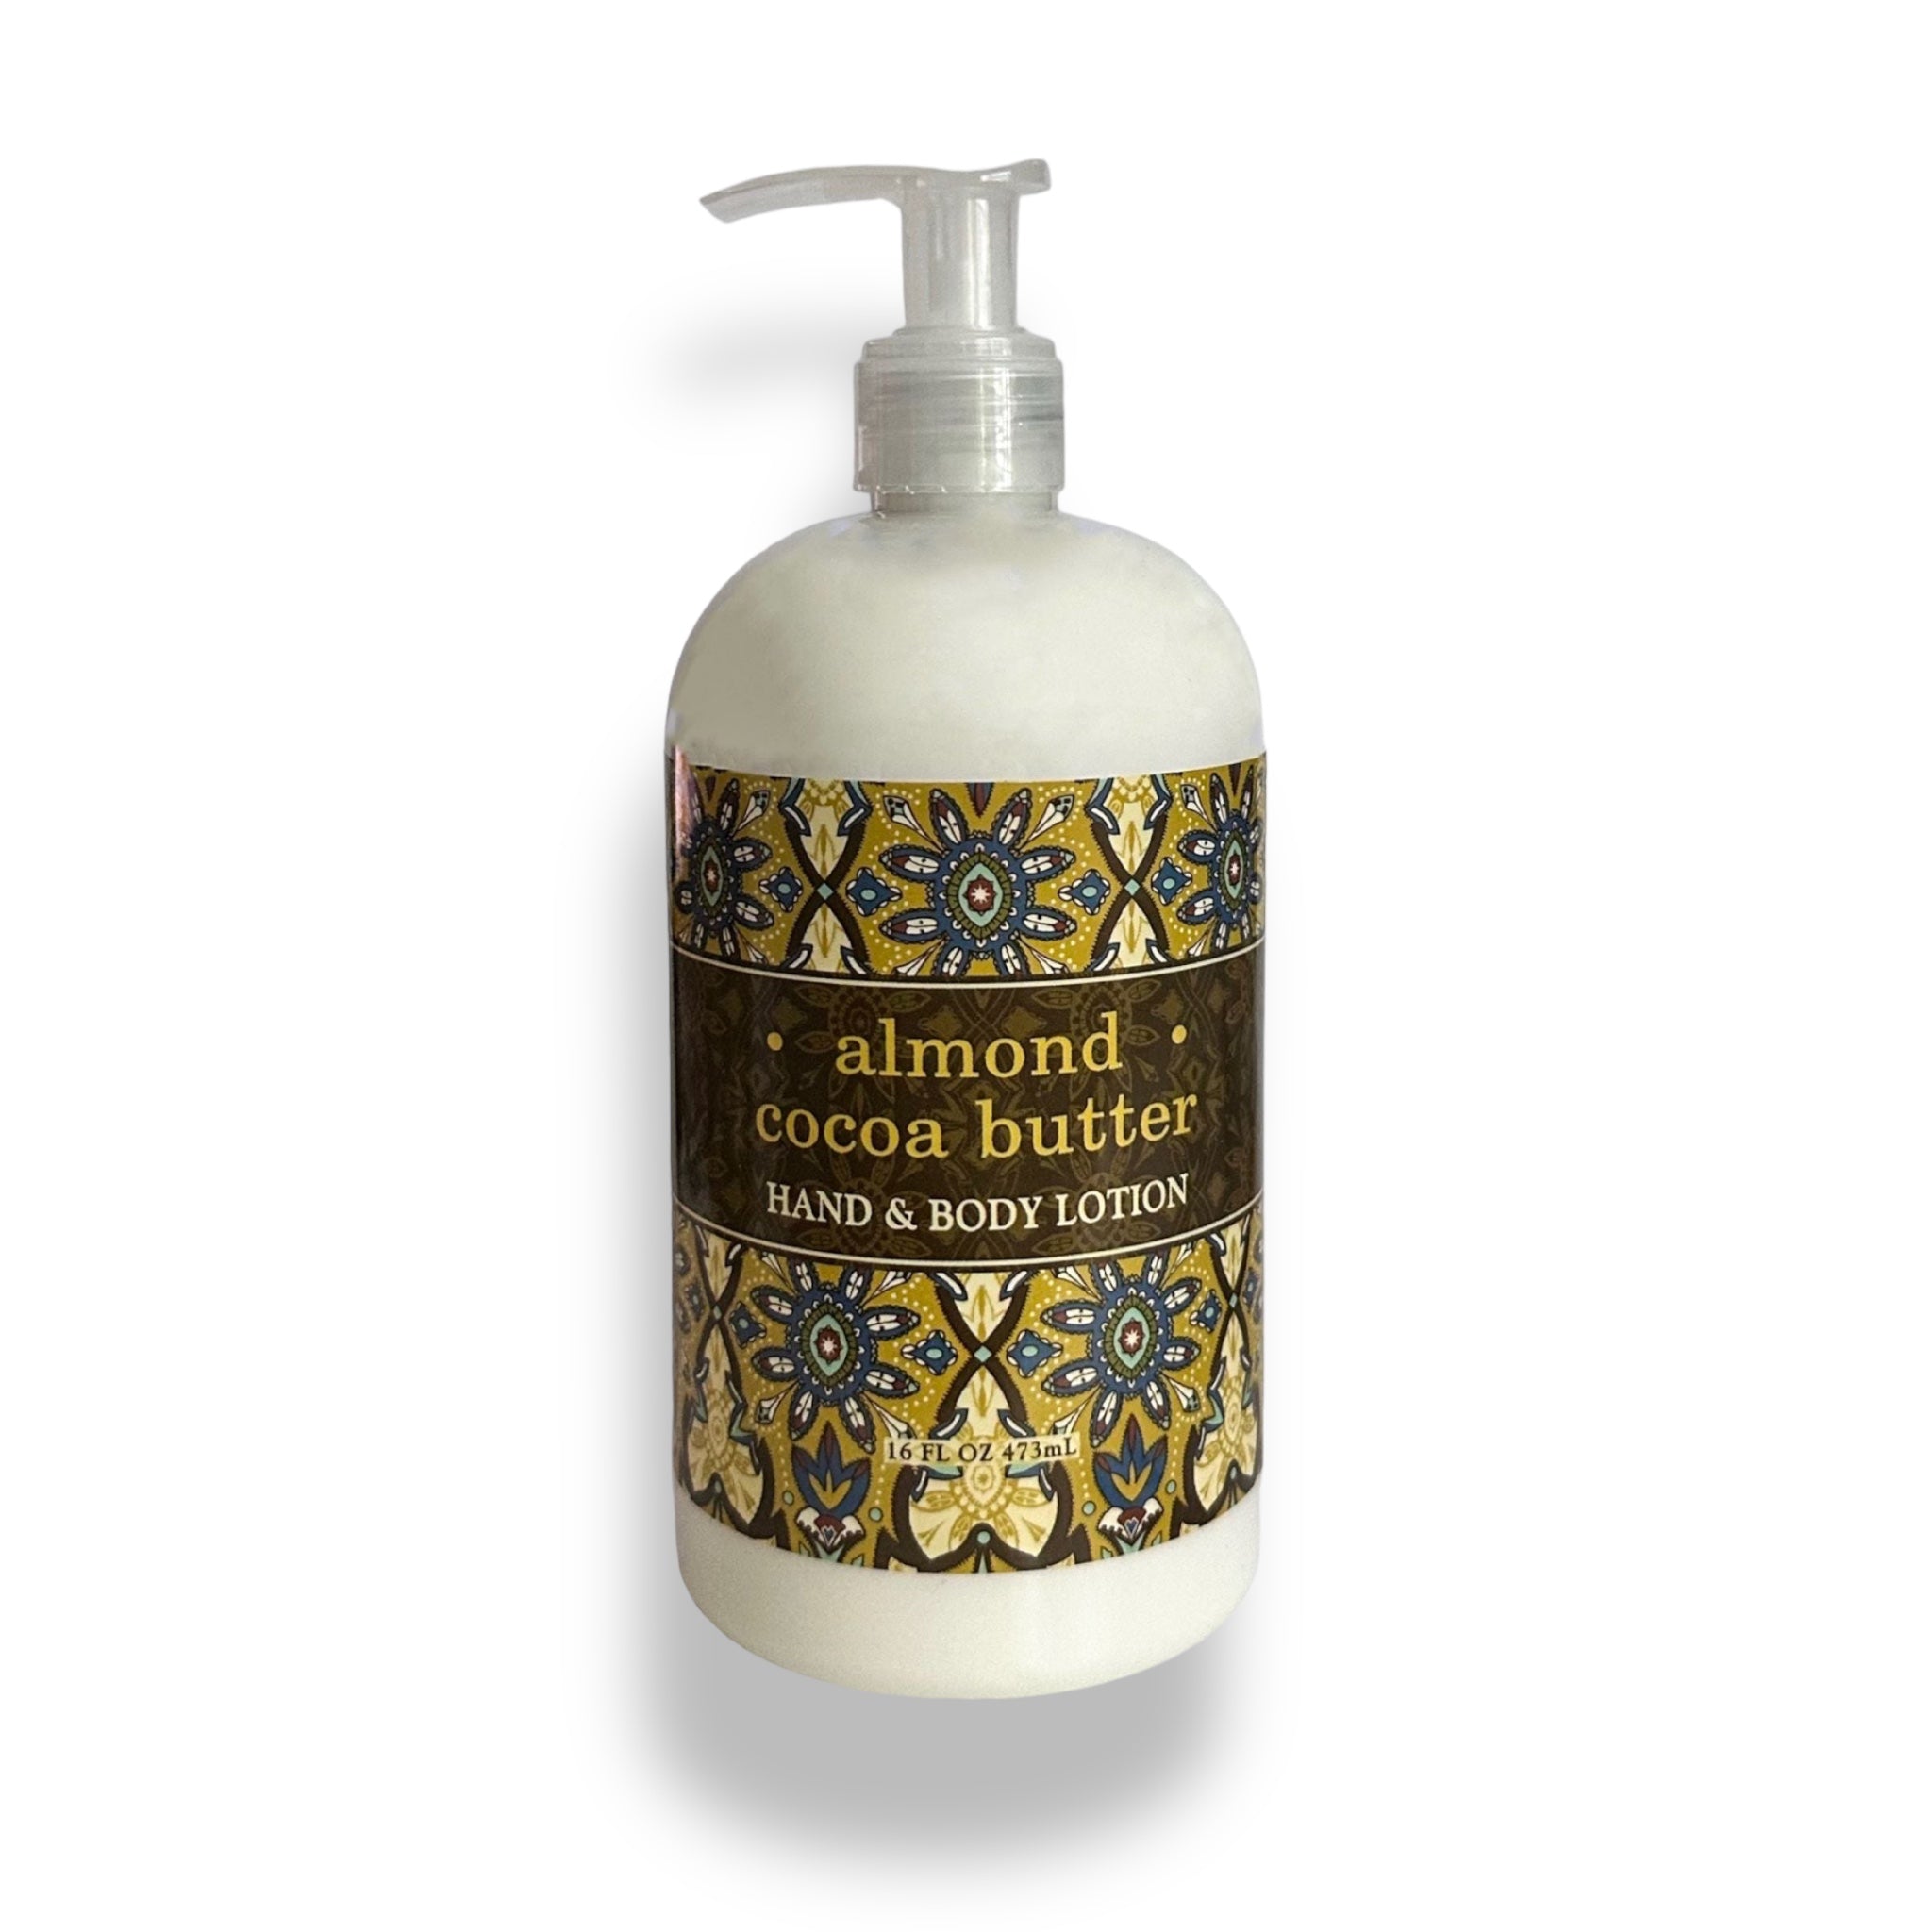 Greenwich Bay Trading Company ALMOND & COCOA BUTTER Hand and Body Lotion